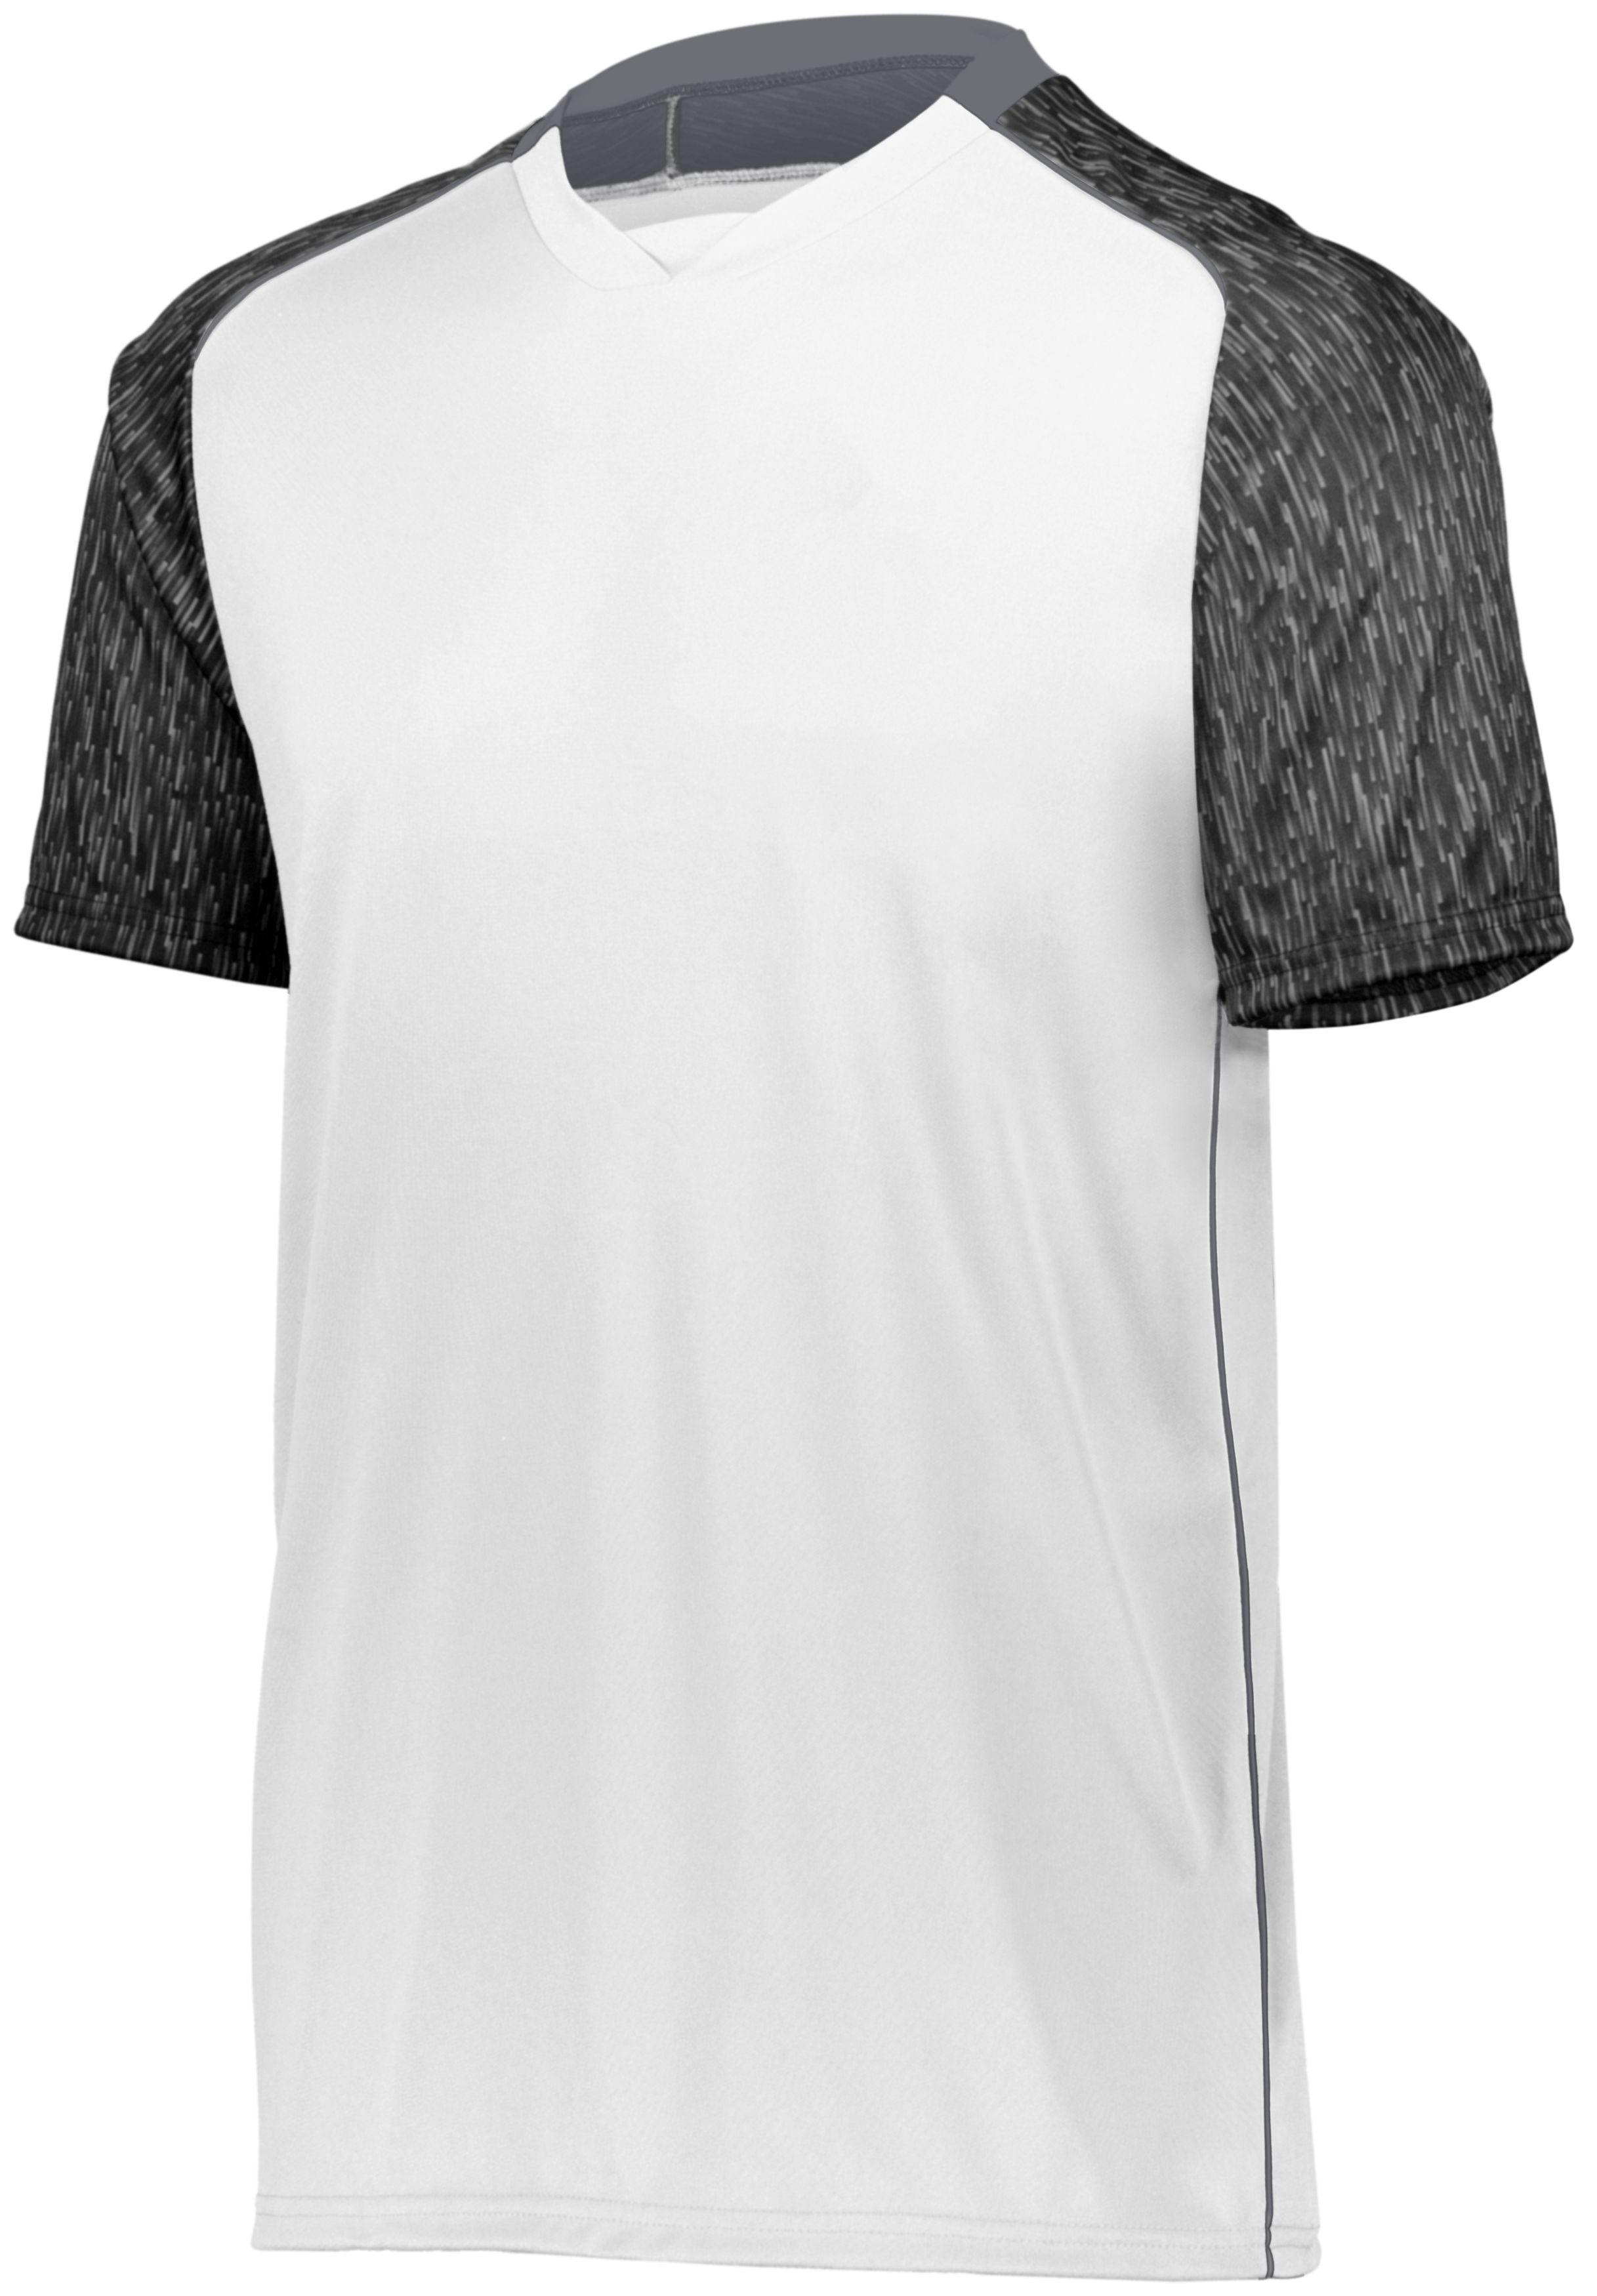 High 5 Youth Hawthorn Soccer Jersey in White/Black Print/Graphite  -Part of the Youth, Youth-Jersey, High5-Products, Soccer, Shirts, All-Sports-1 product lines at KanaleyCreations.com